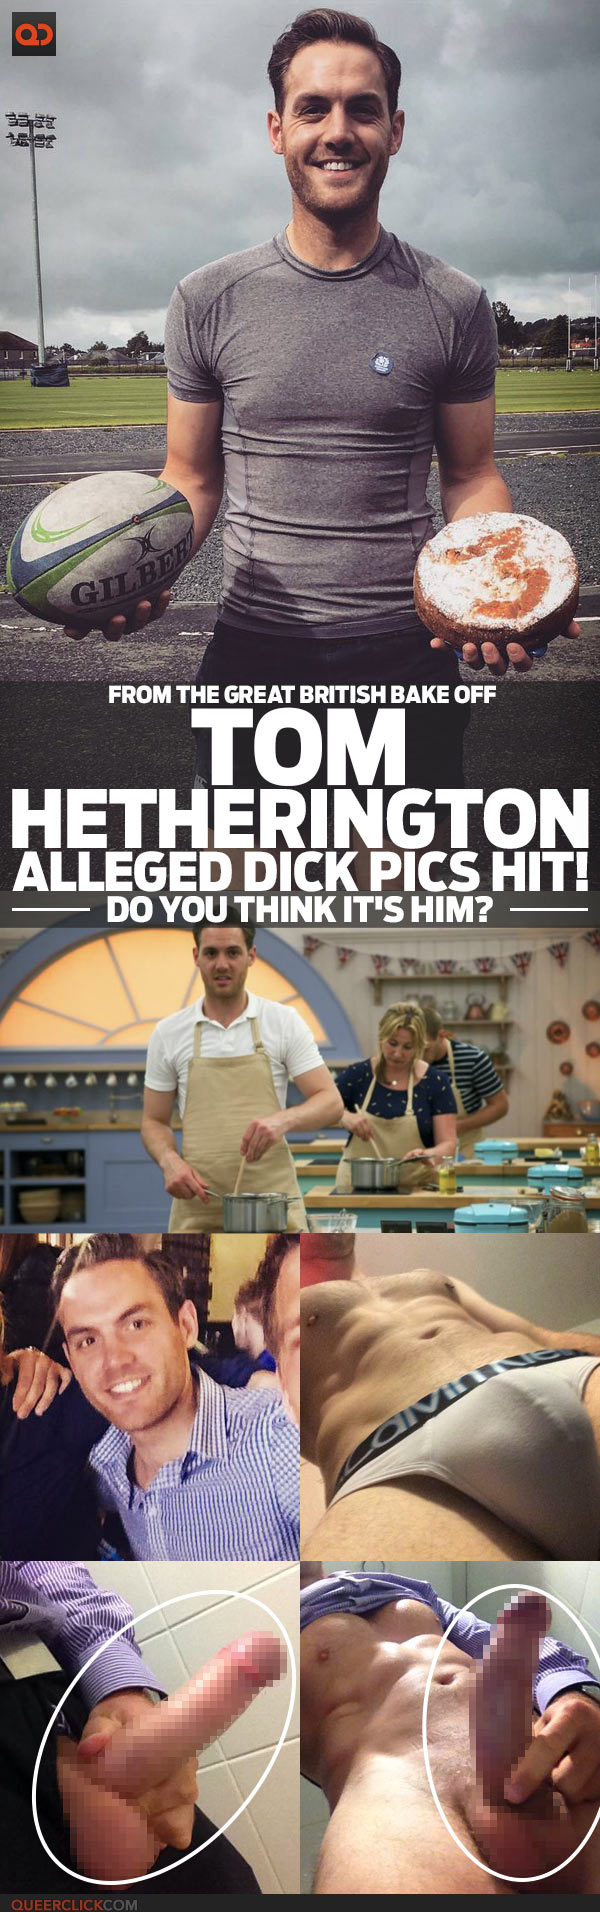 Tom Hetherington, From The Great British Bake Off, Alleged Dick Pics Hit! - Do You Think It's Him?